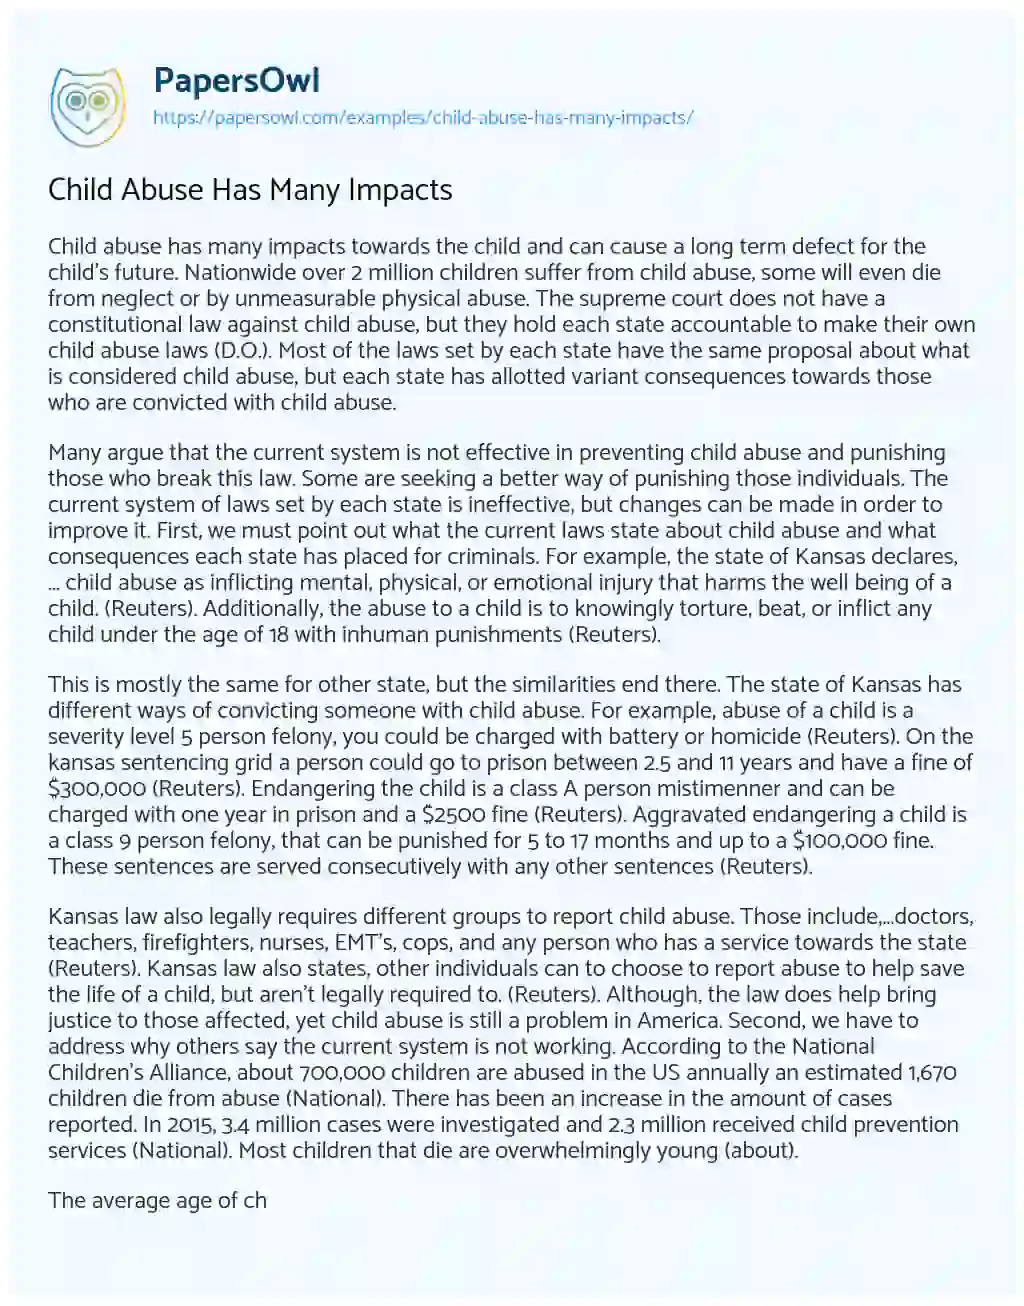 Child Abuse has Many Impacts essay